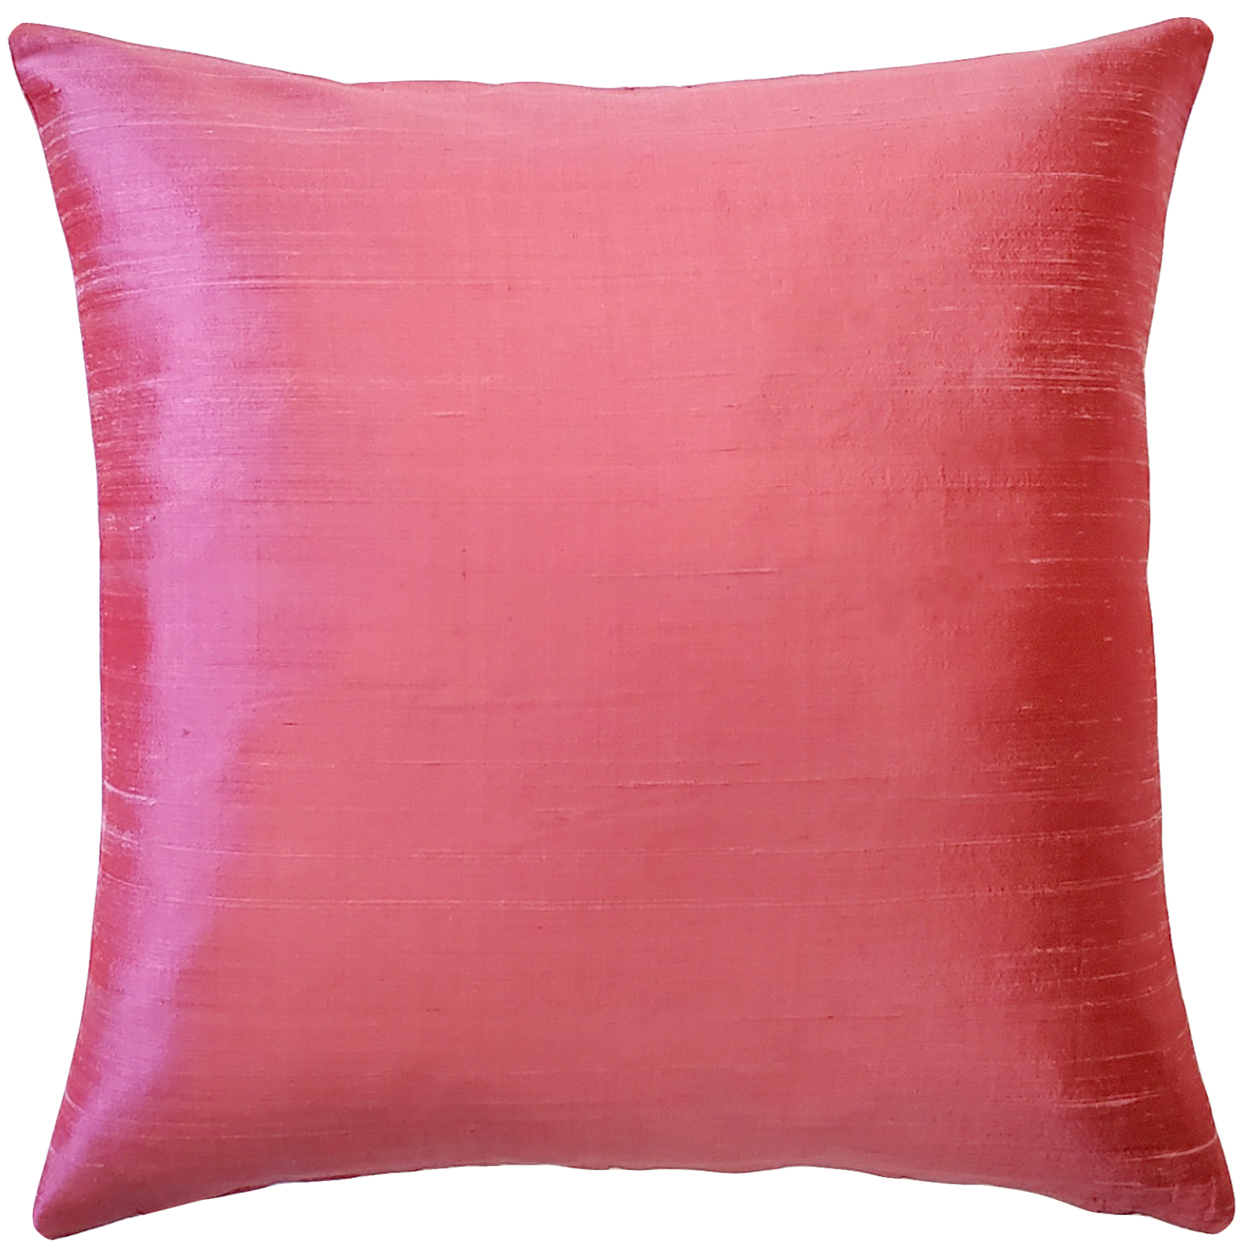 Sankara Rose Blush Silk Throw Pillow 20x20 Inches Square, Complete Pillow With Polyfill Pillow Insert